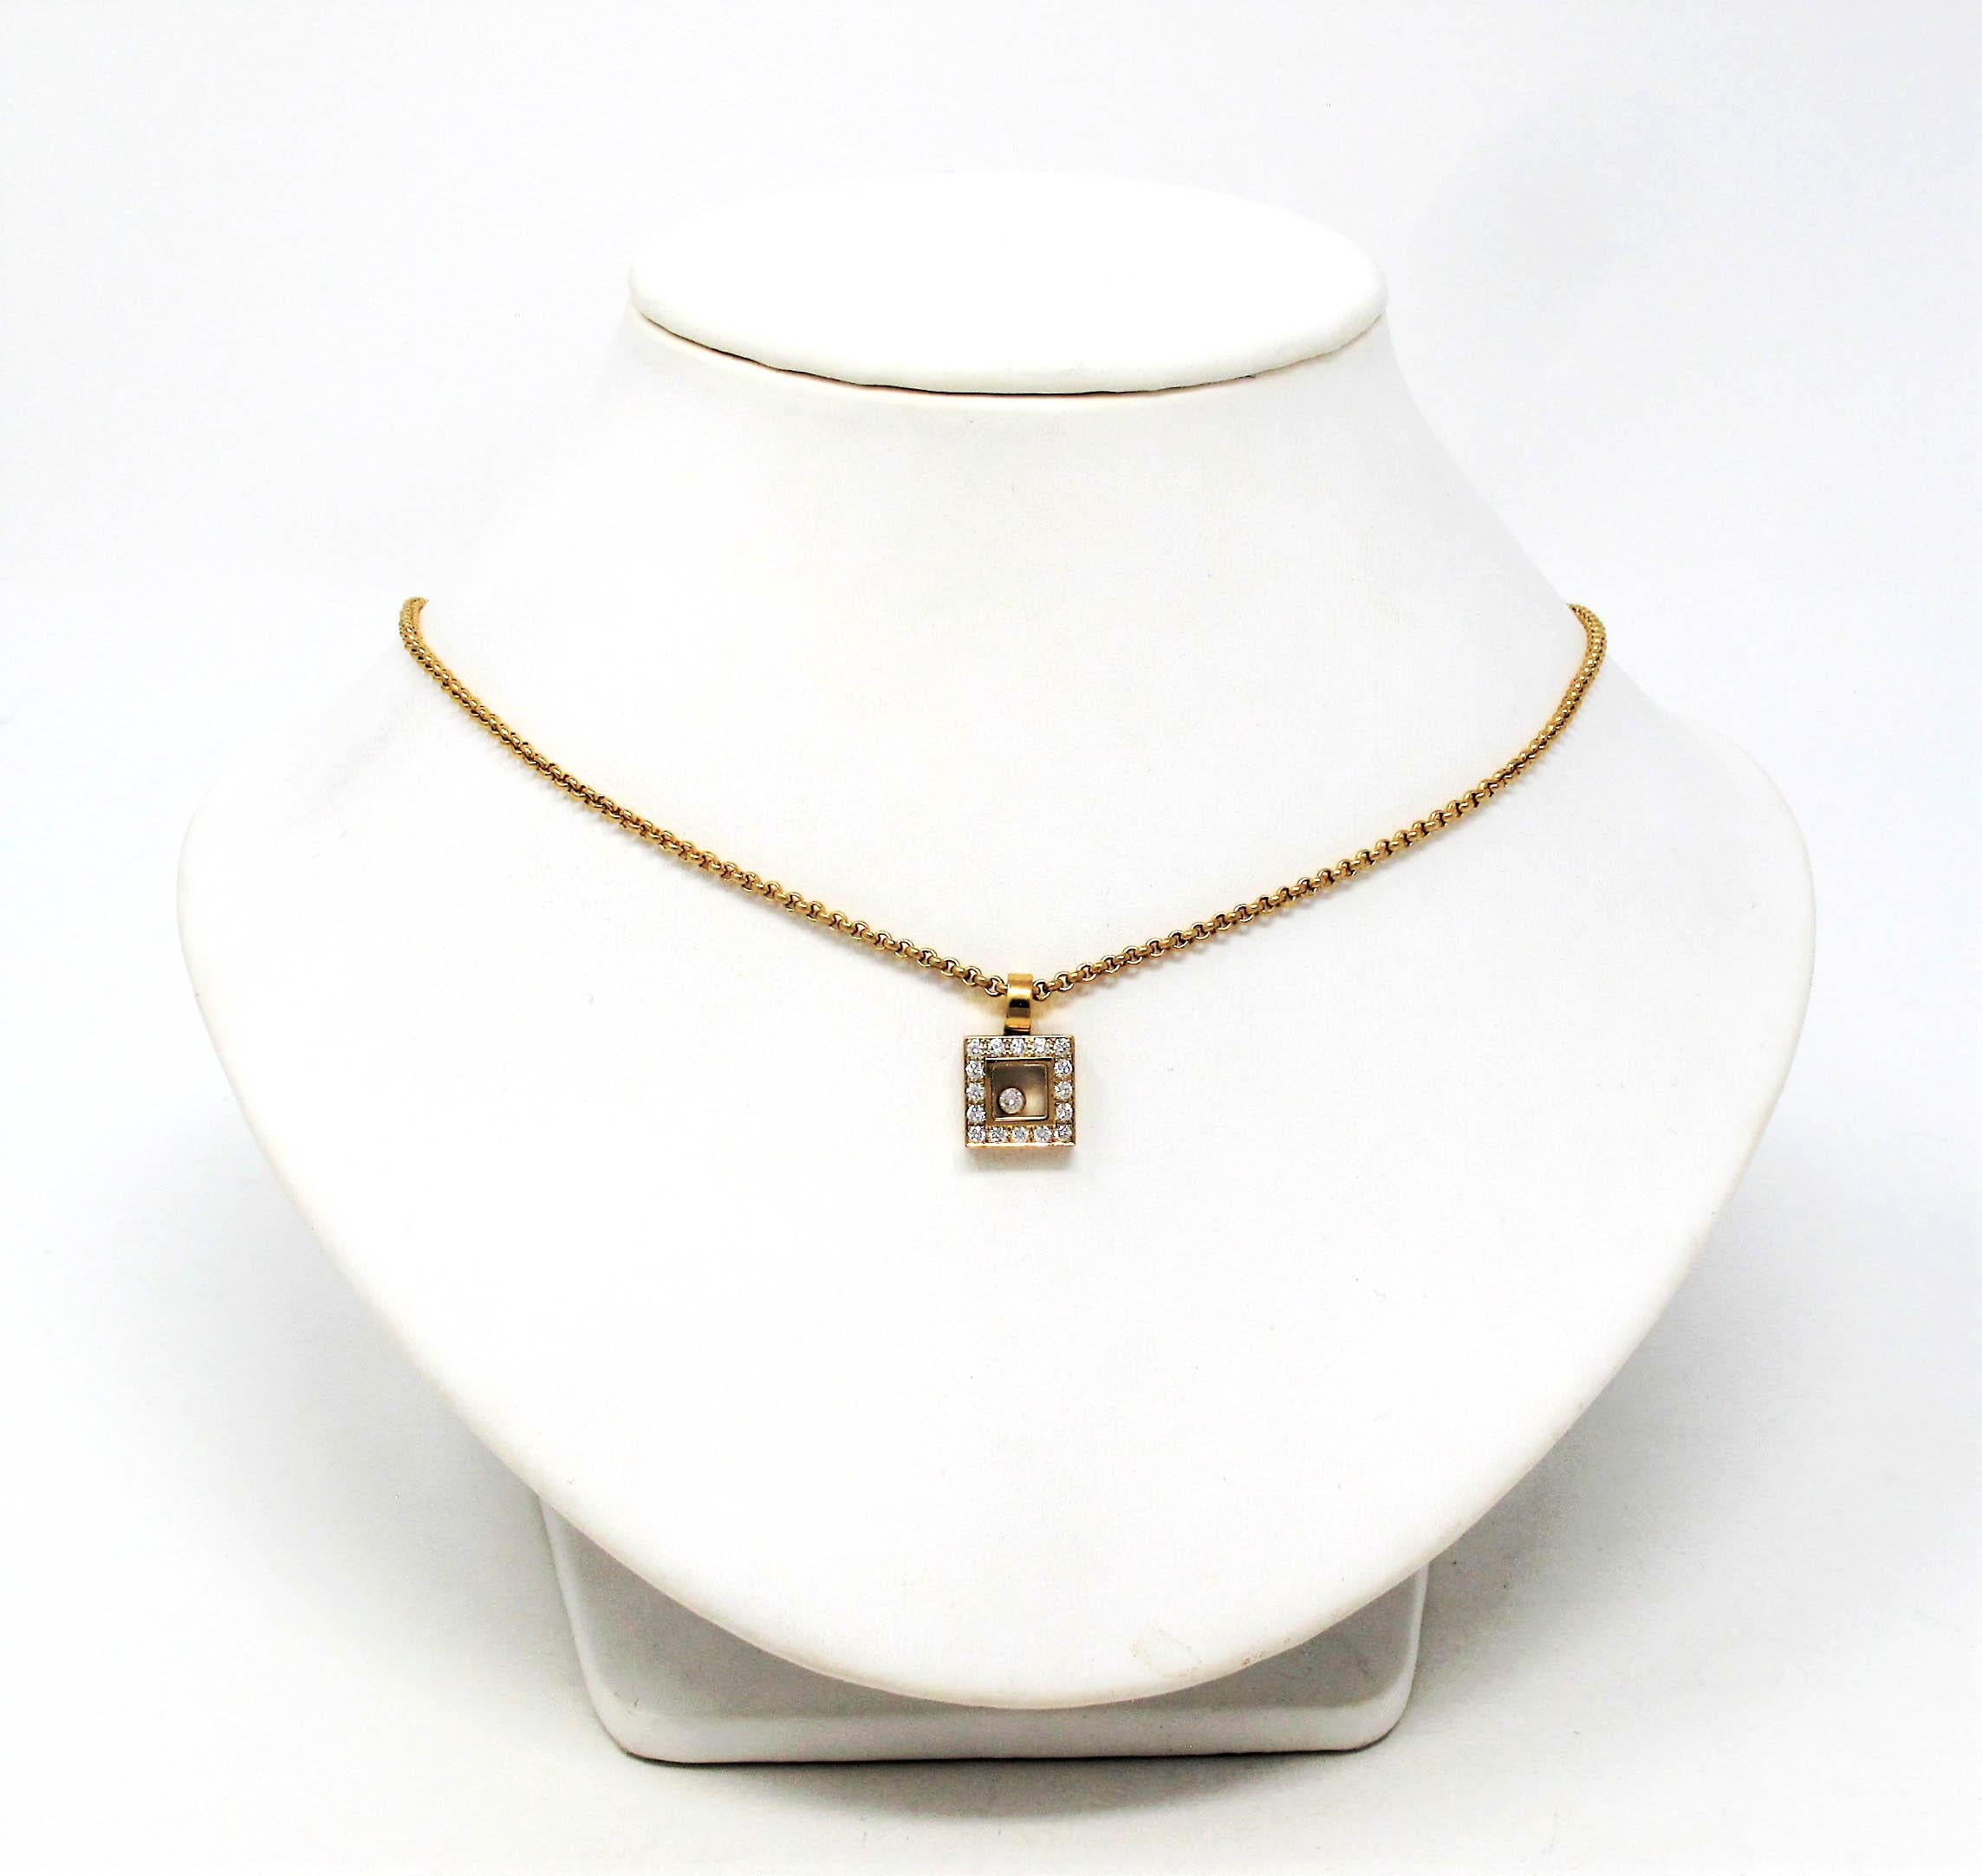 Chopard Floating Happy Diamonds Square Pendant Necklace in 18 Karat Yellow Gold  1